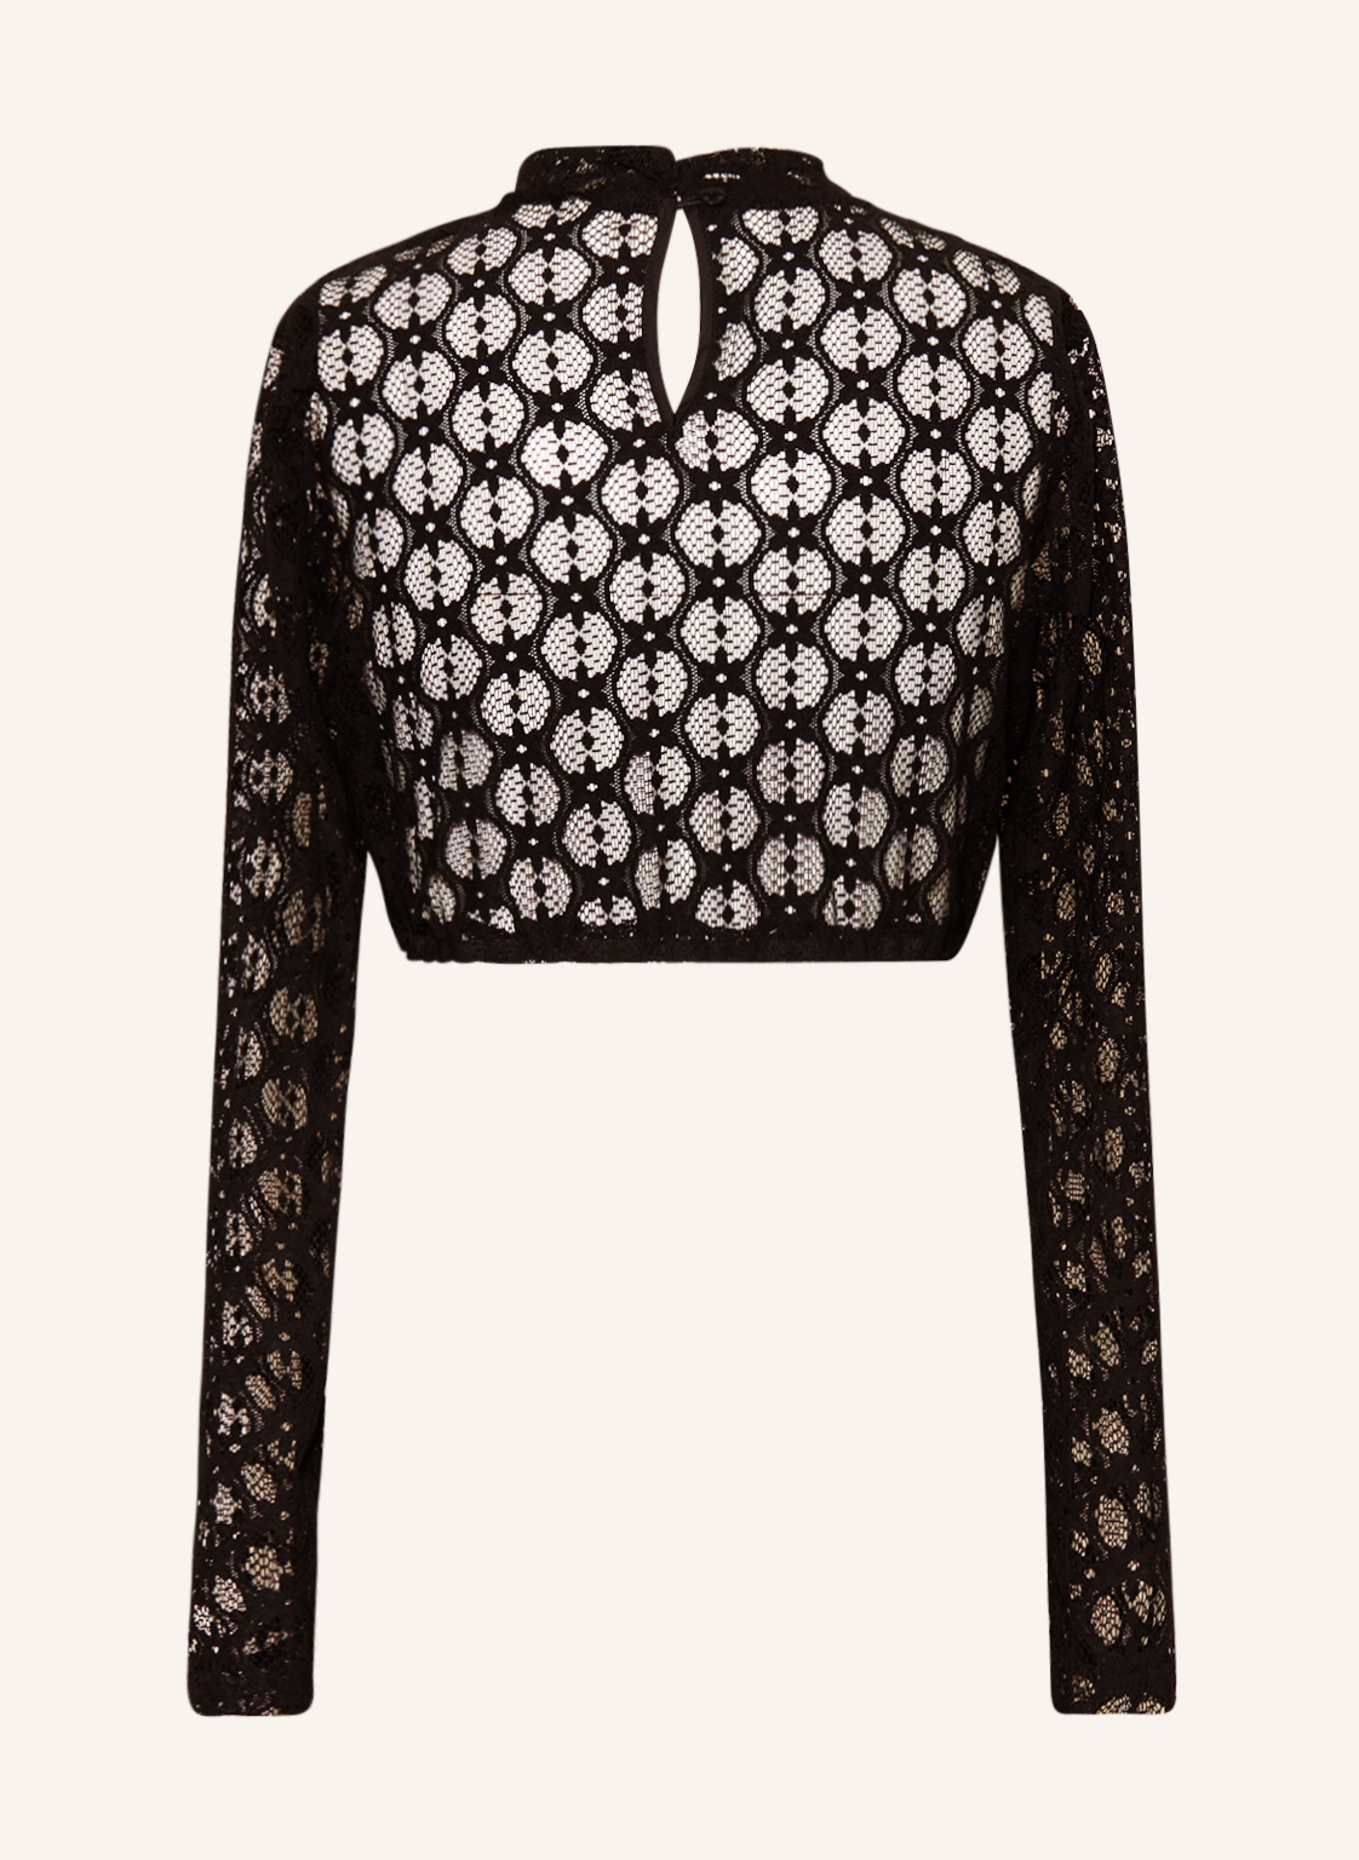 BERWIN & WOLFF Dirndl blouse made of lace, Color: BLACK (Image 2)